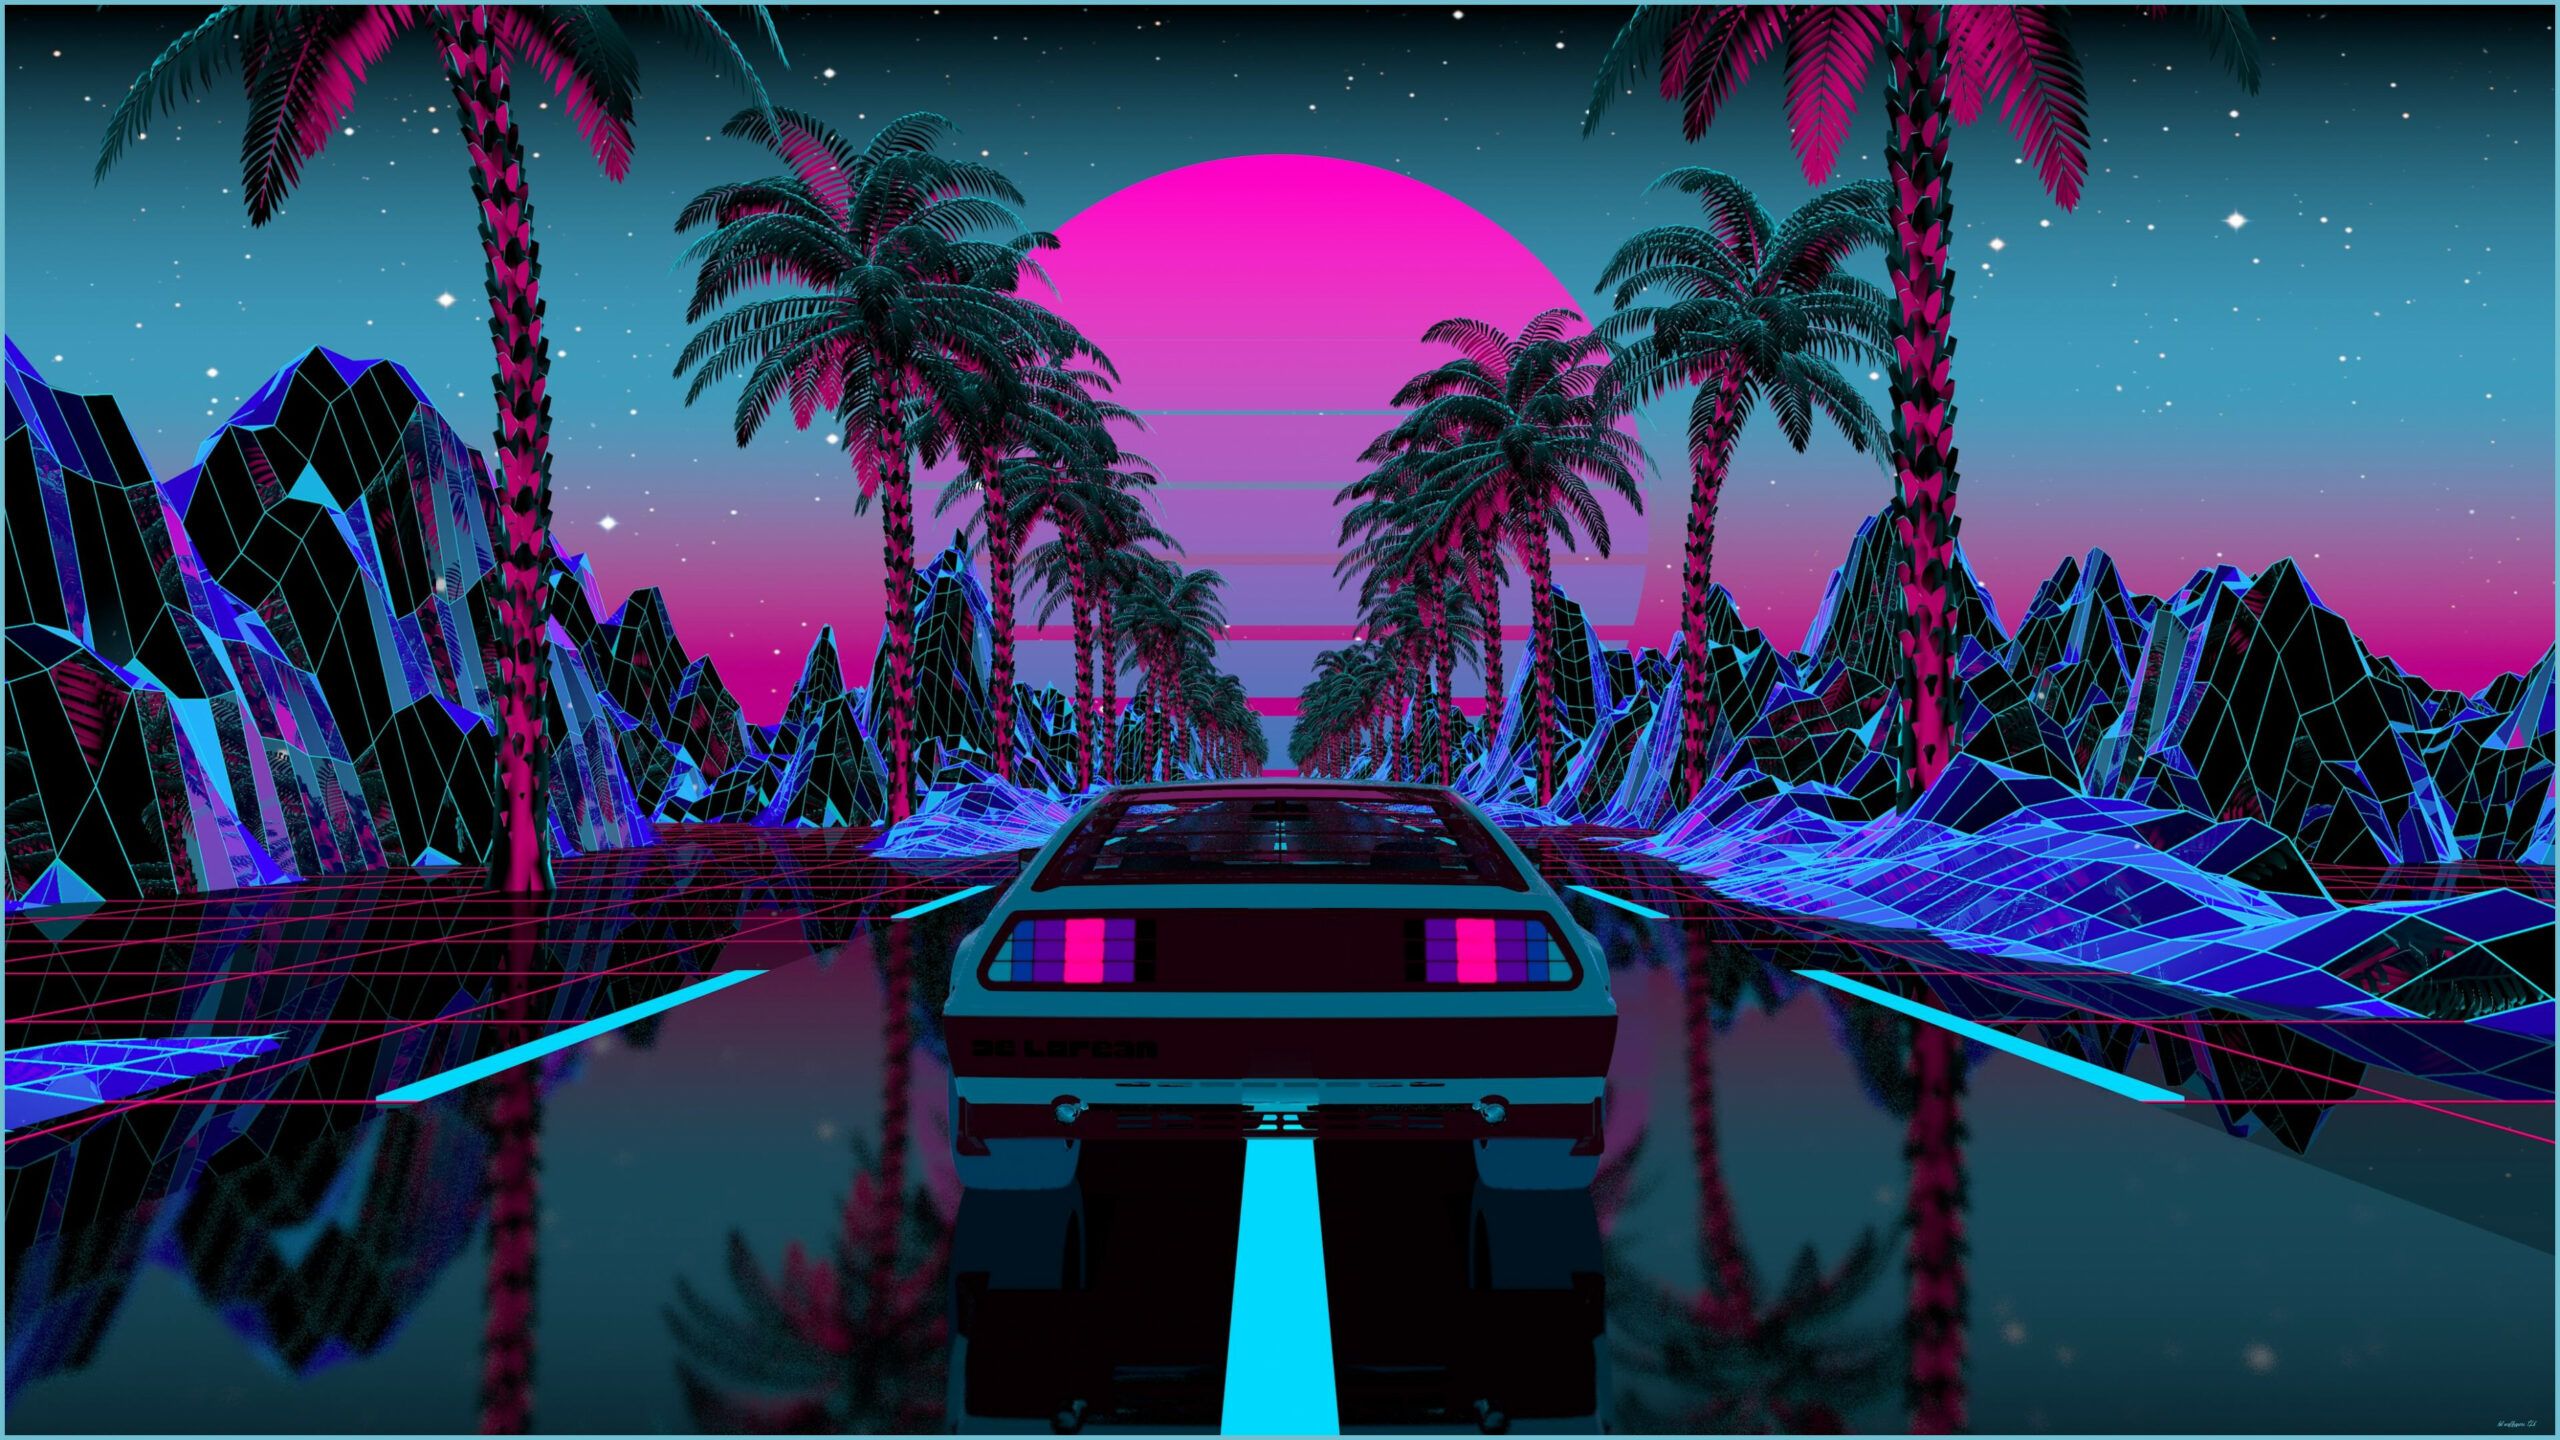 Synthwave Aesthetic Wallpaper 4K - á ˆ Purple Neon Aesthetic Stock Background Royalty Free Synthwave Vectors Download On Depositphotos / We hope you enjoy our rising collection of aesthetic wallpaper